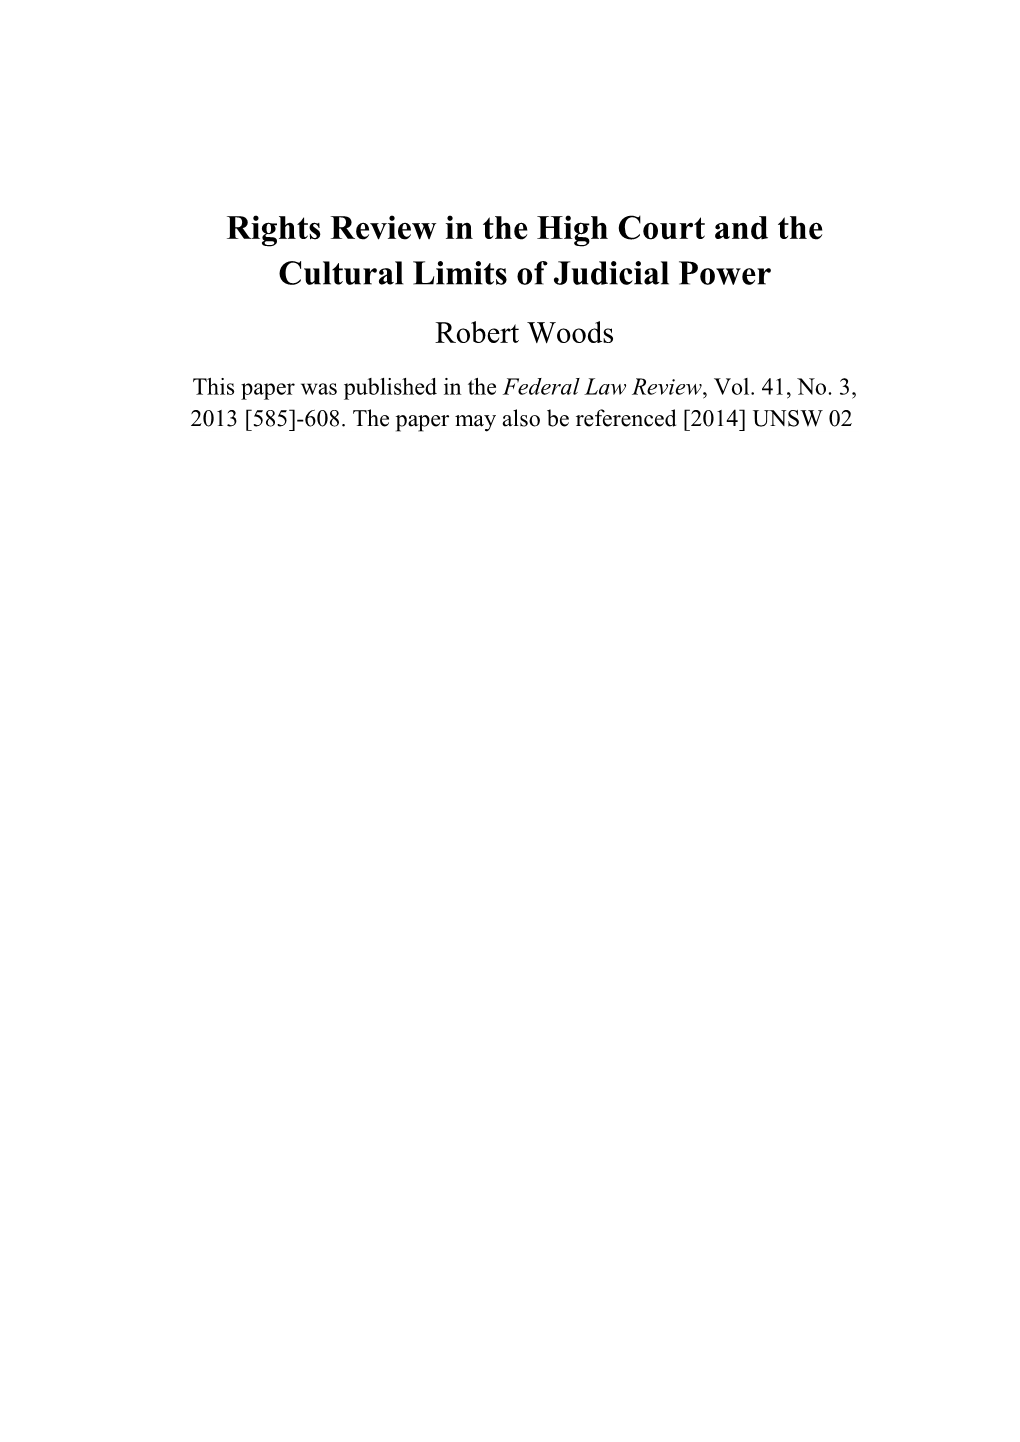 Rights Review in the High Court and the Cultural Limits of Judicial Power Robert Woods